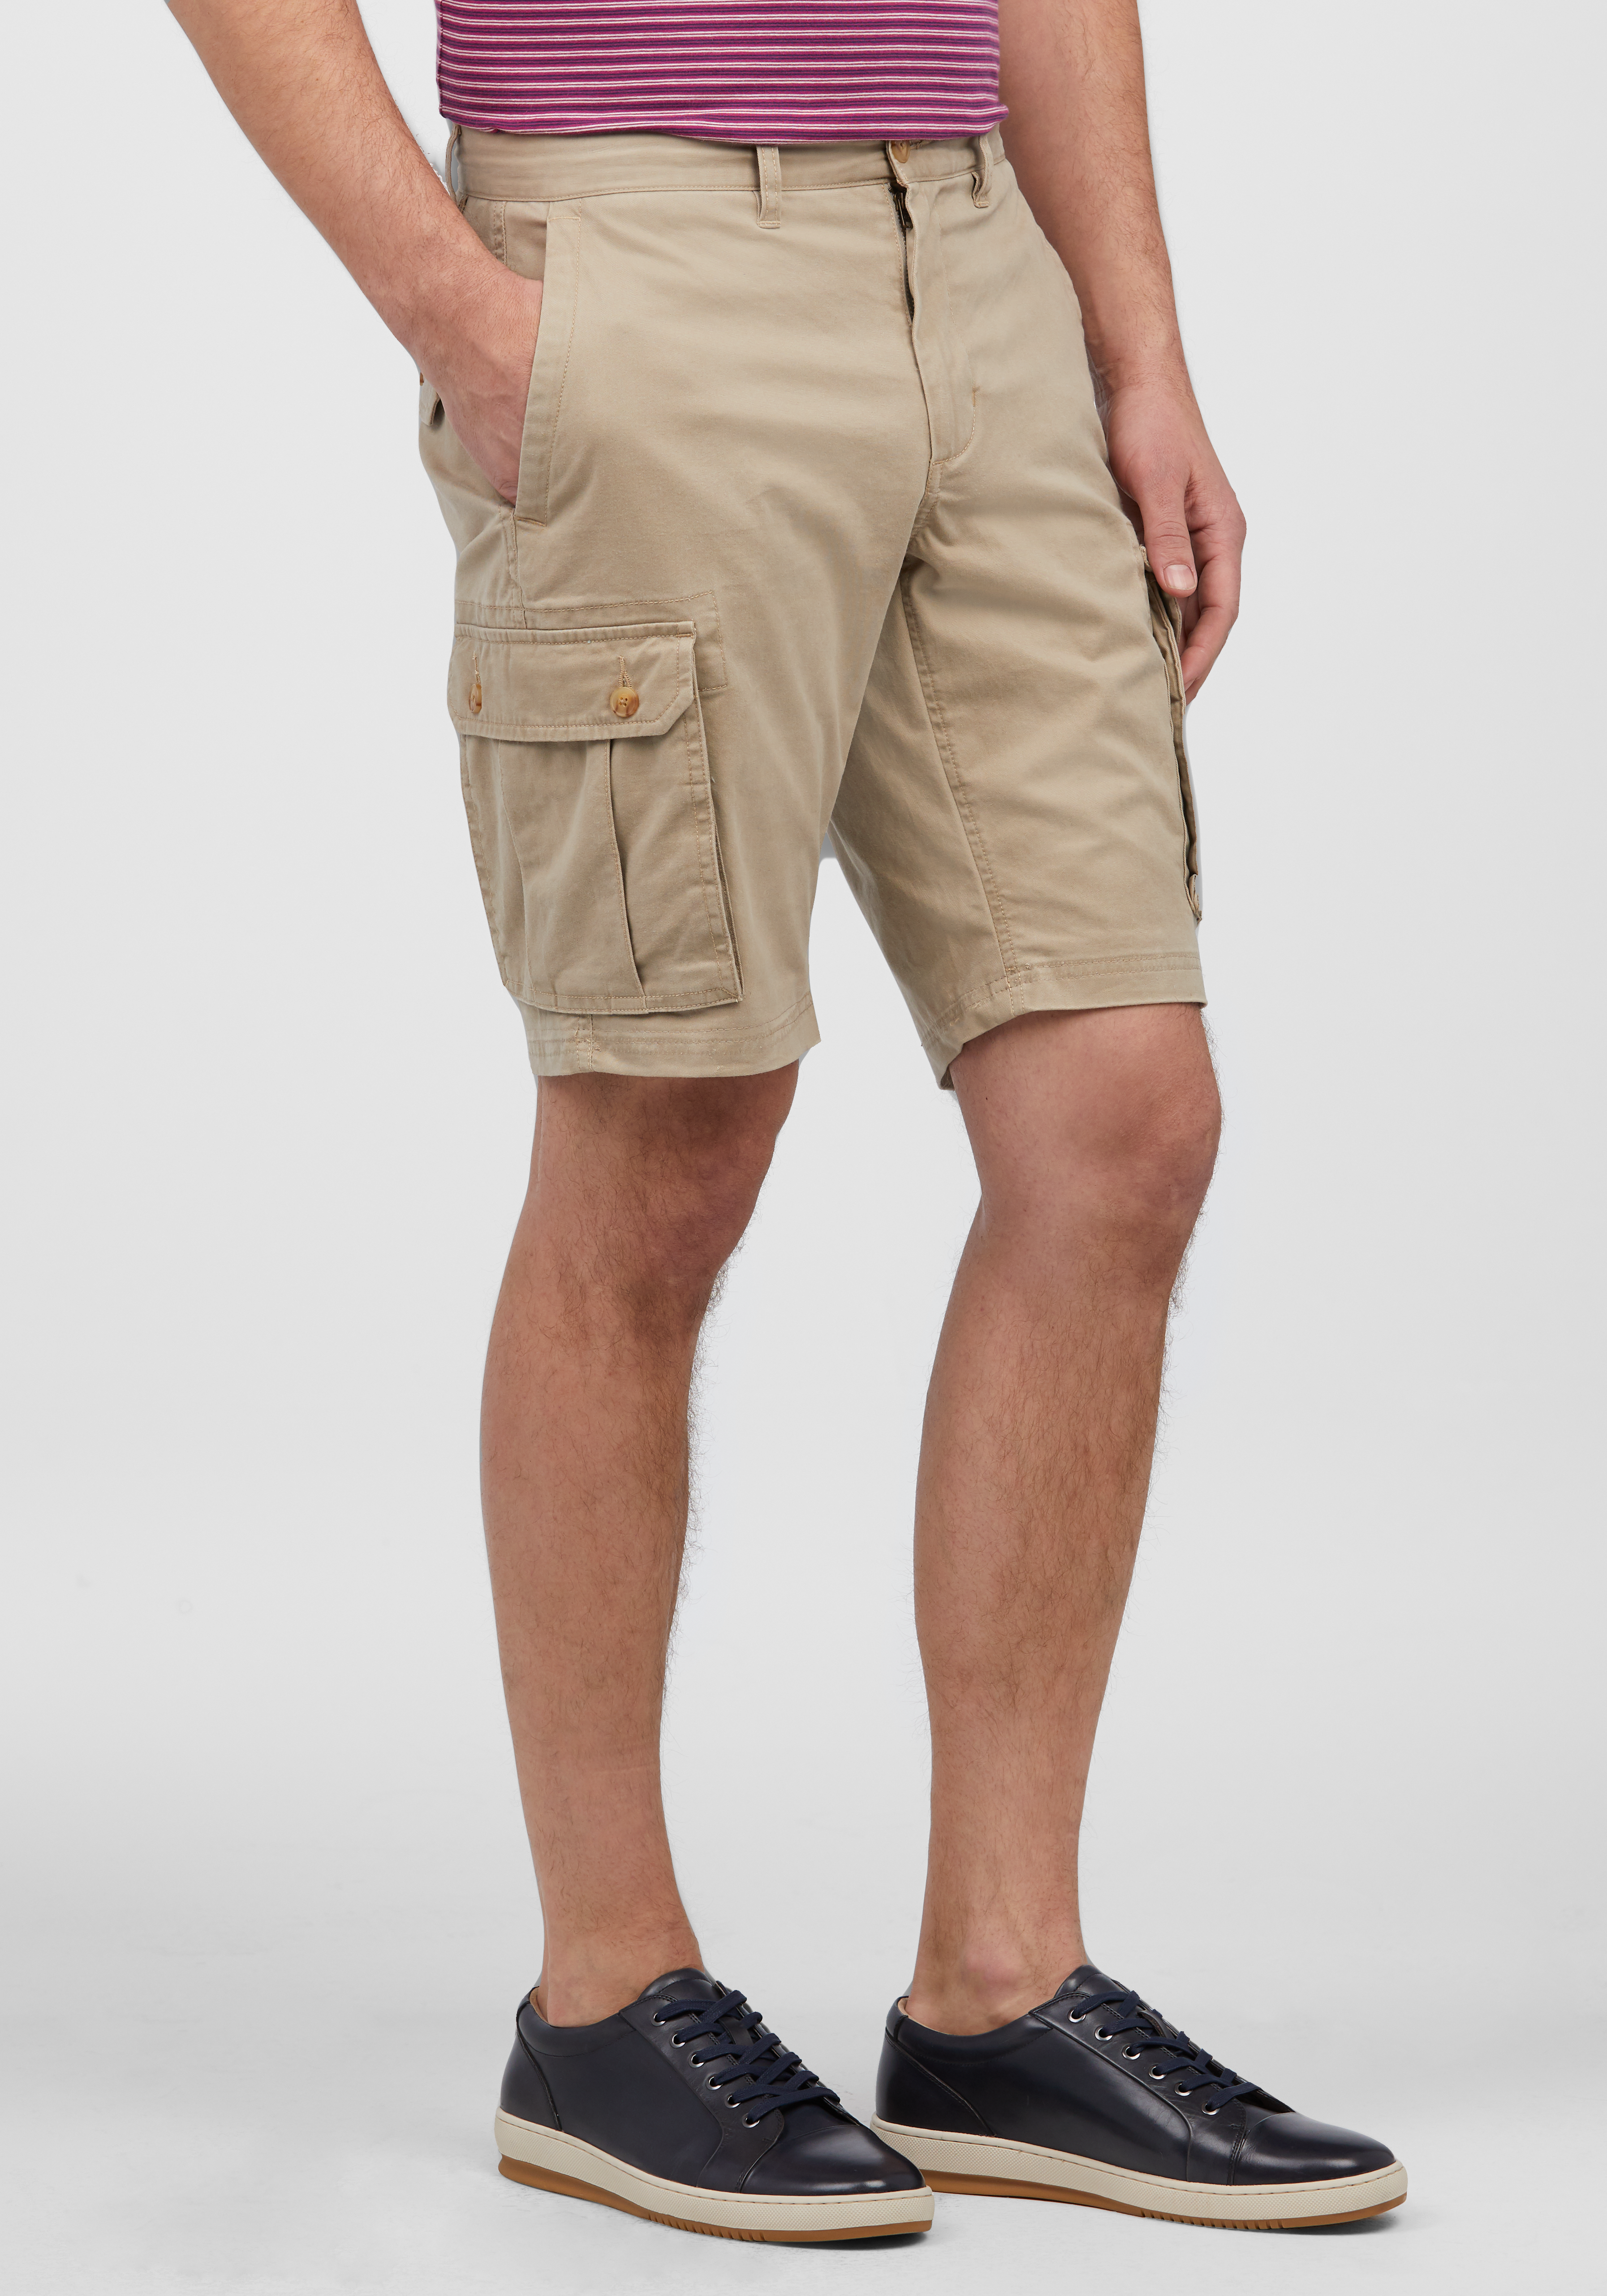 1905 Collection Tailored Fit Flat Front Cargo Shorts - Big & Tall - New ...